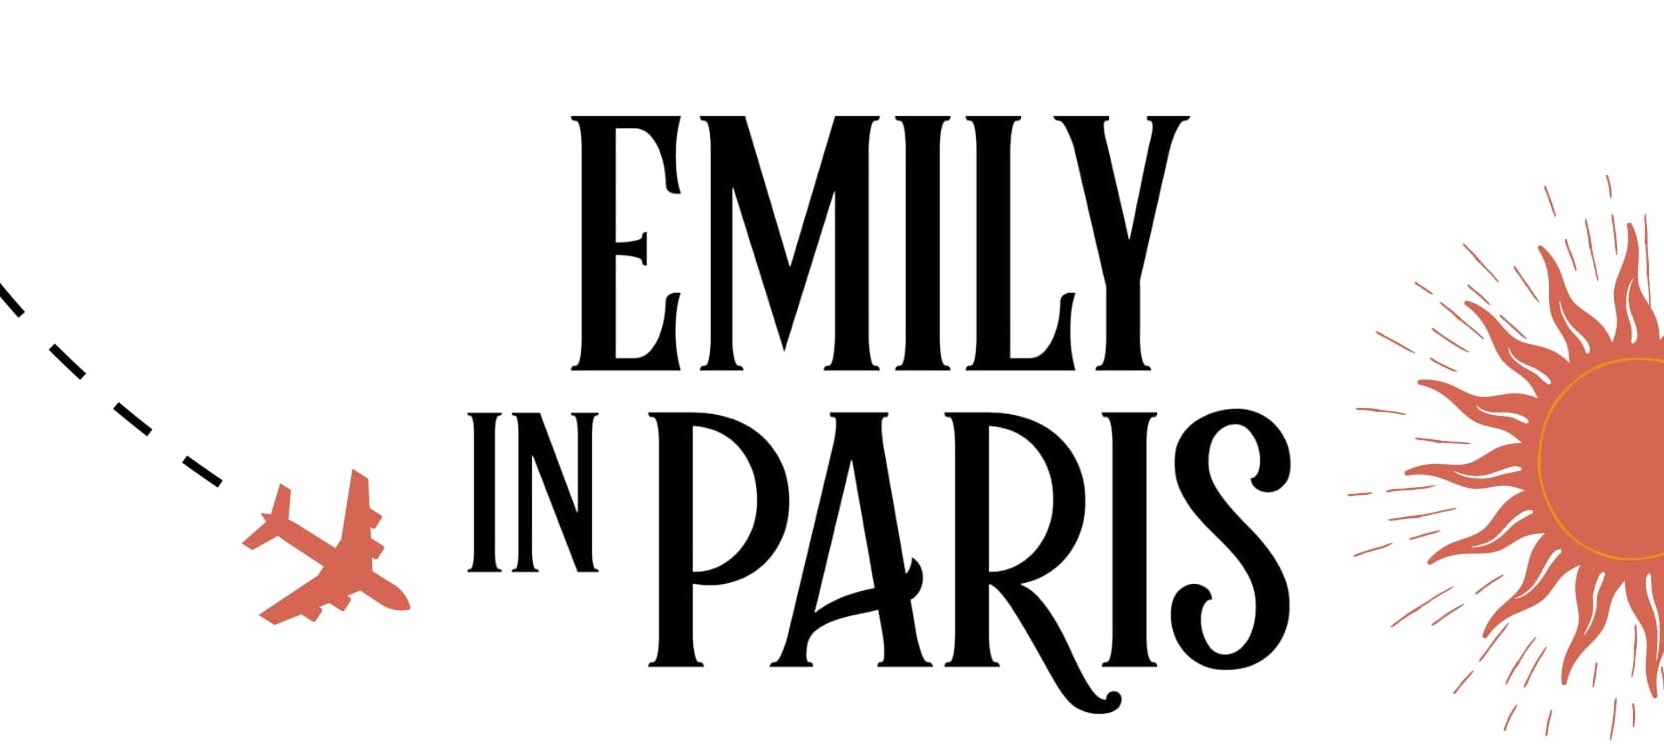 Student Show Case: Multicultural Communication (Emily in Paris)